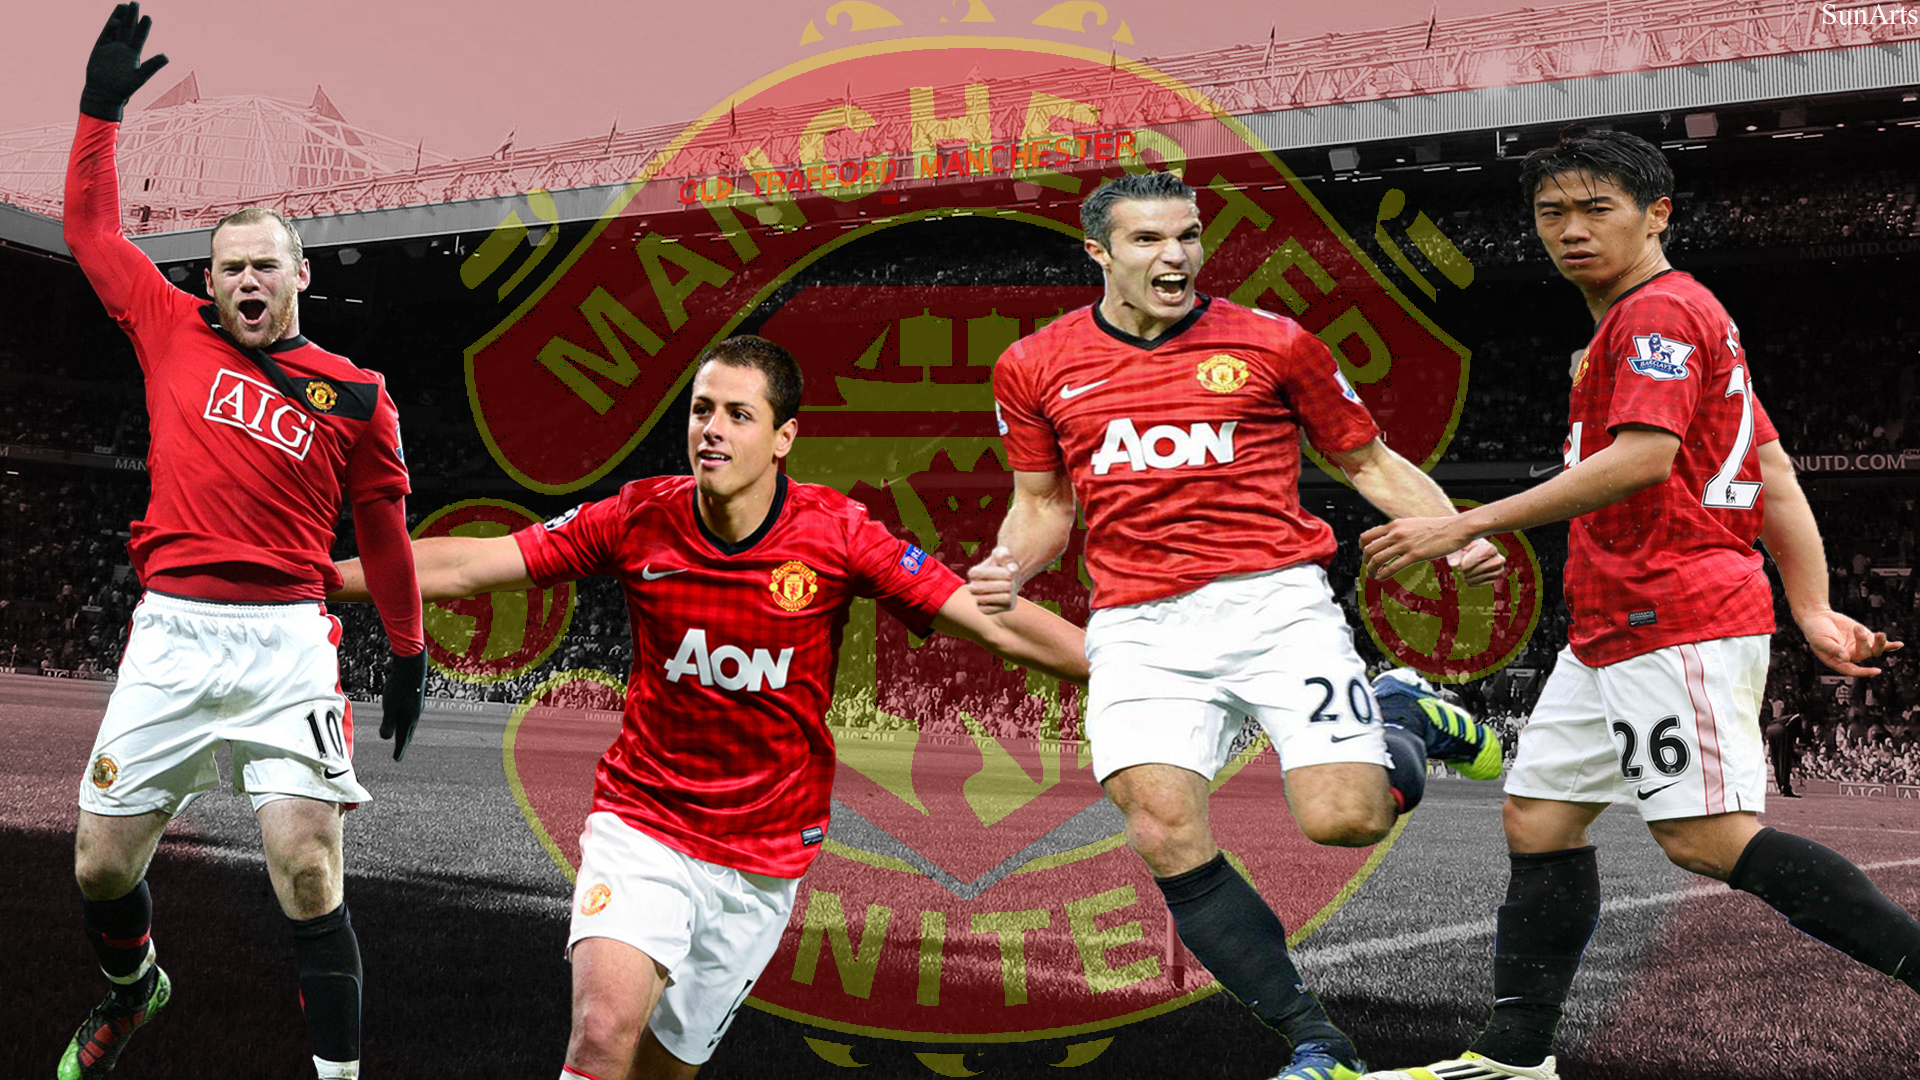 Manchester United Wallpaper By Sunarts1